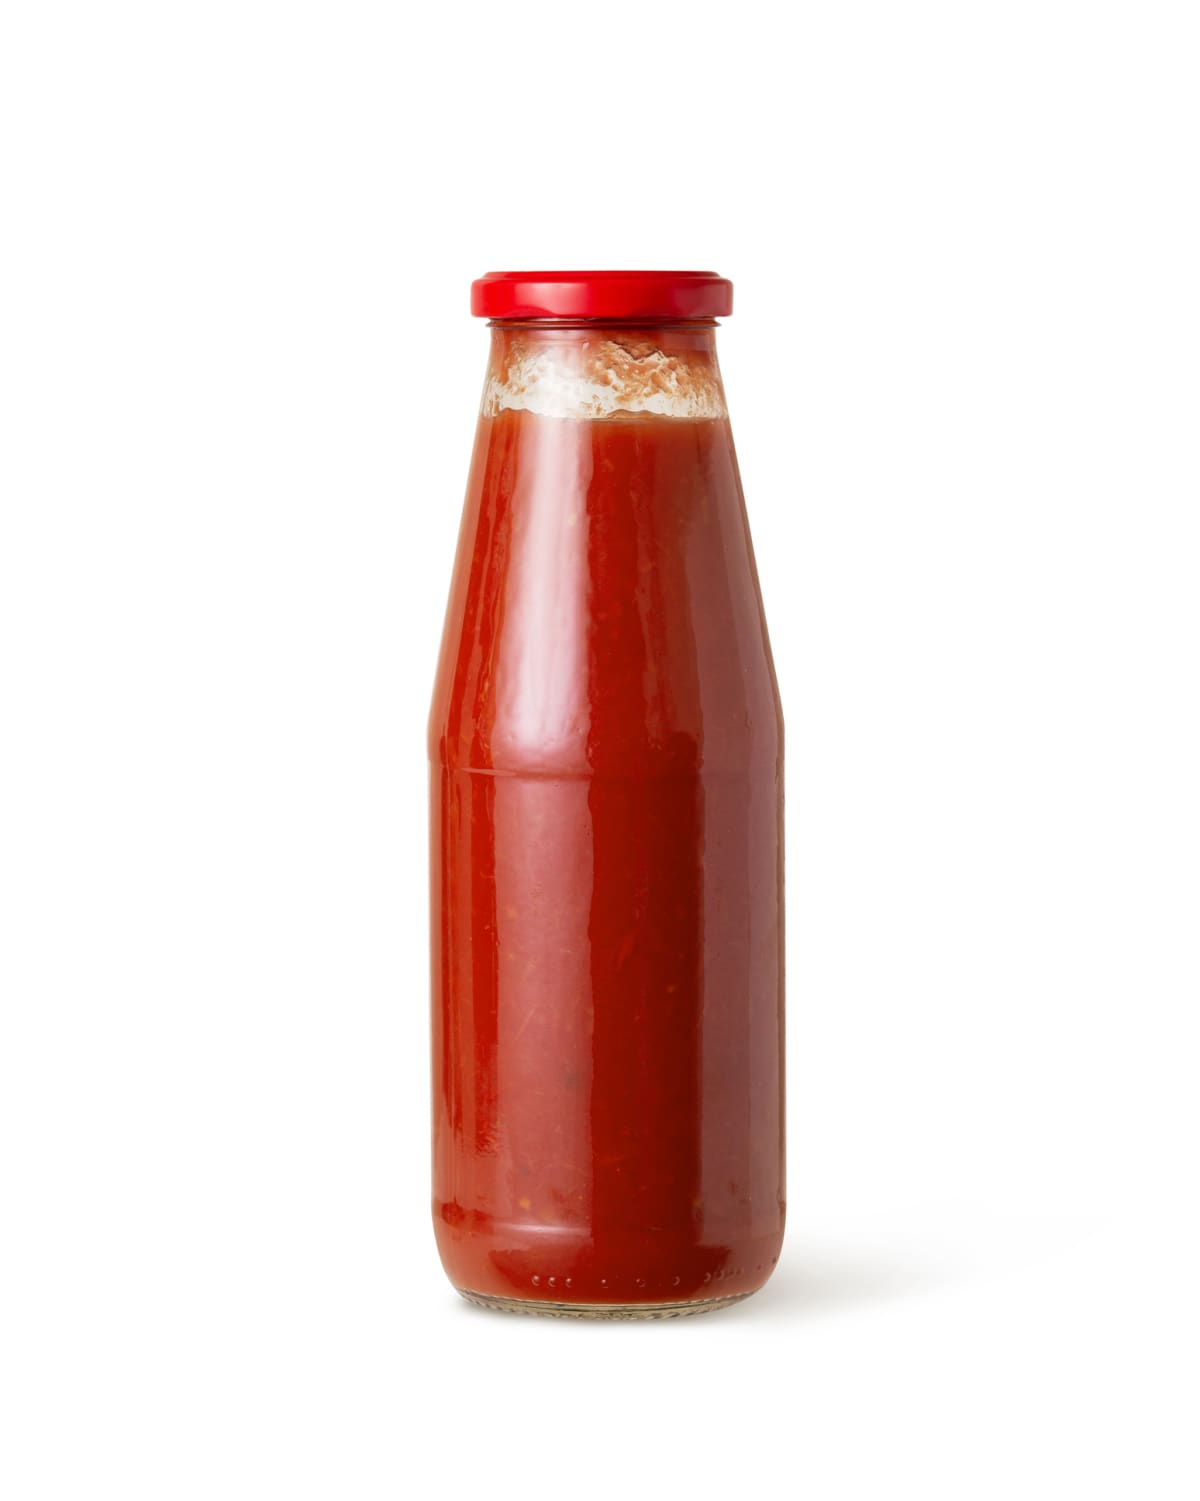 Tomato sauce in glass jar on white background